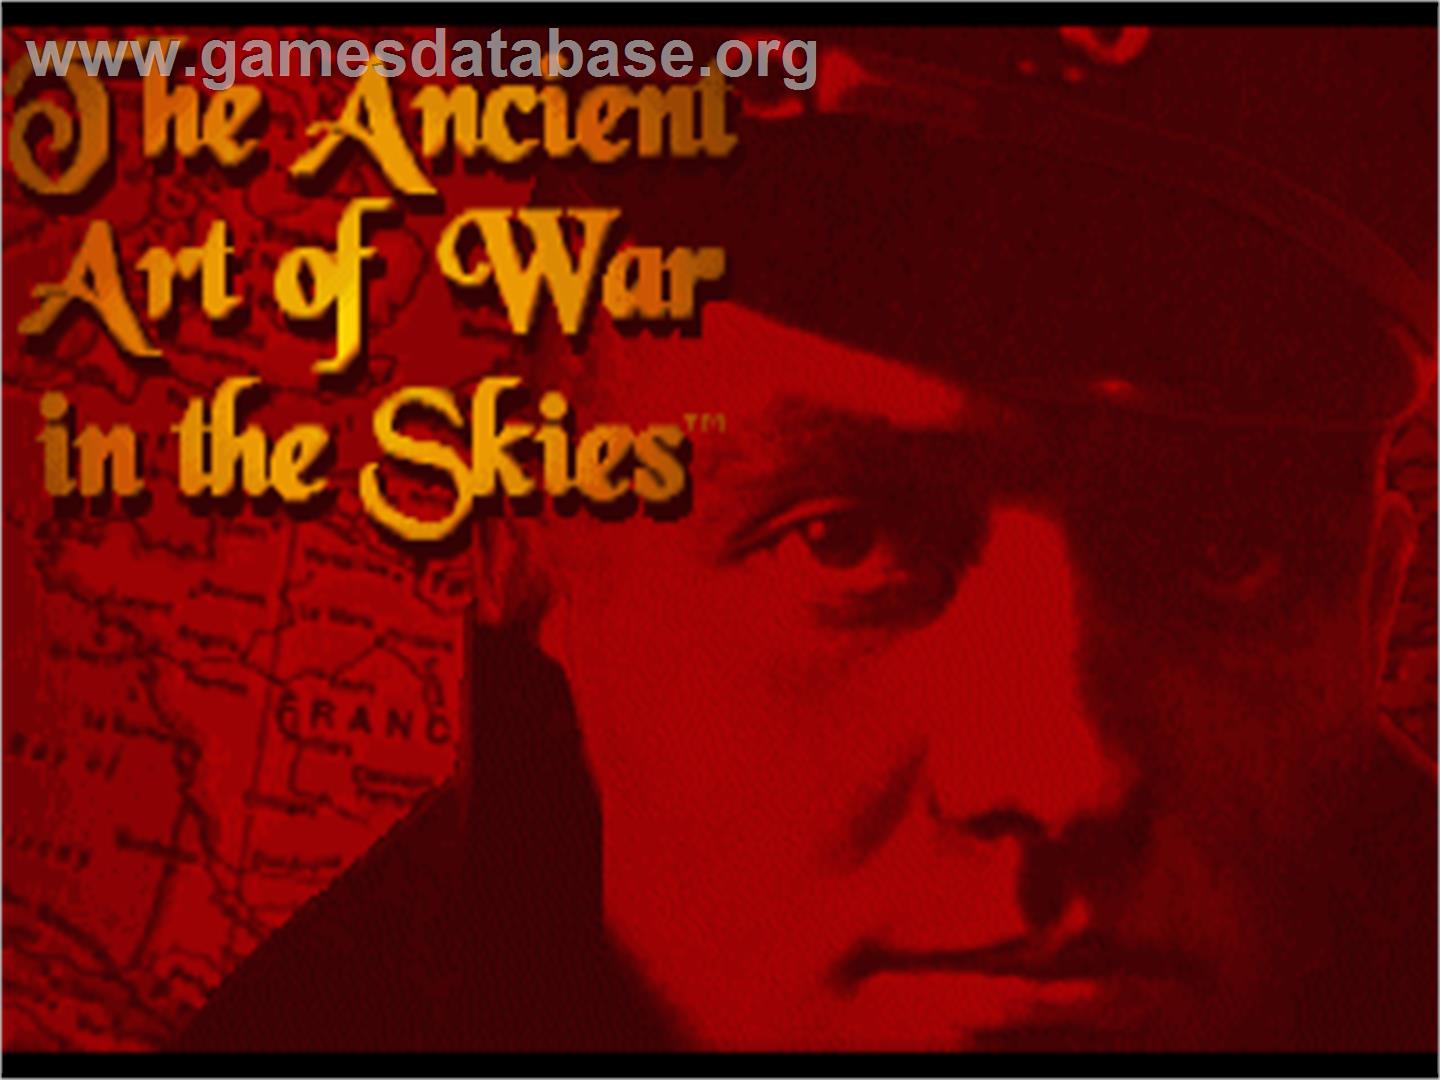 Ancient Art of War in the Skies - Commodore Amiga - Artwork - Title Screen